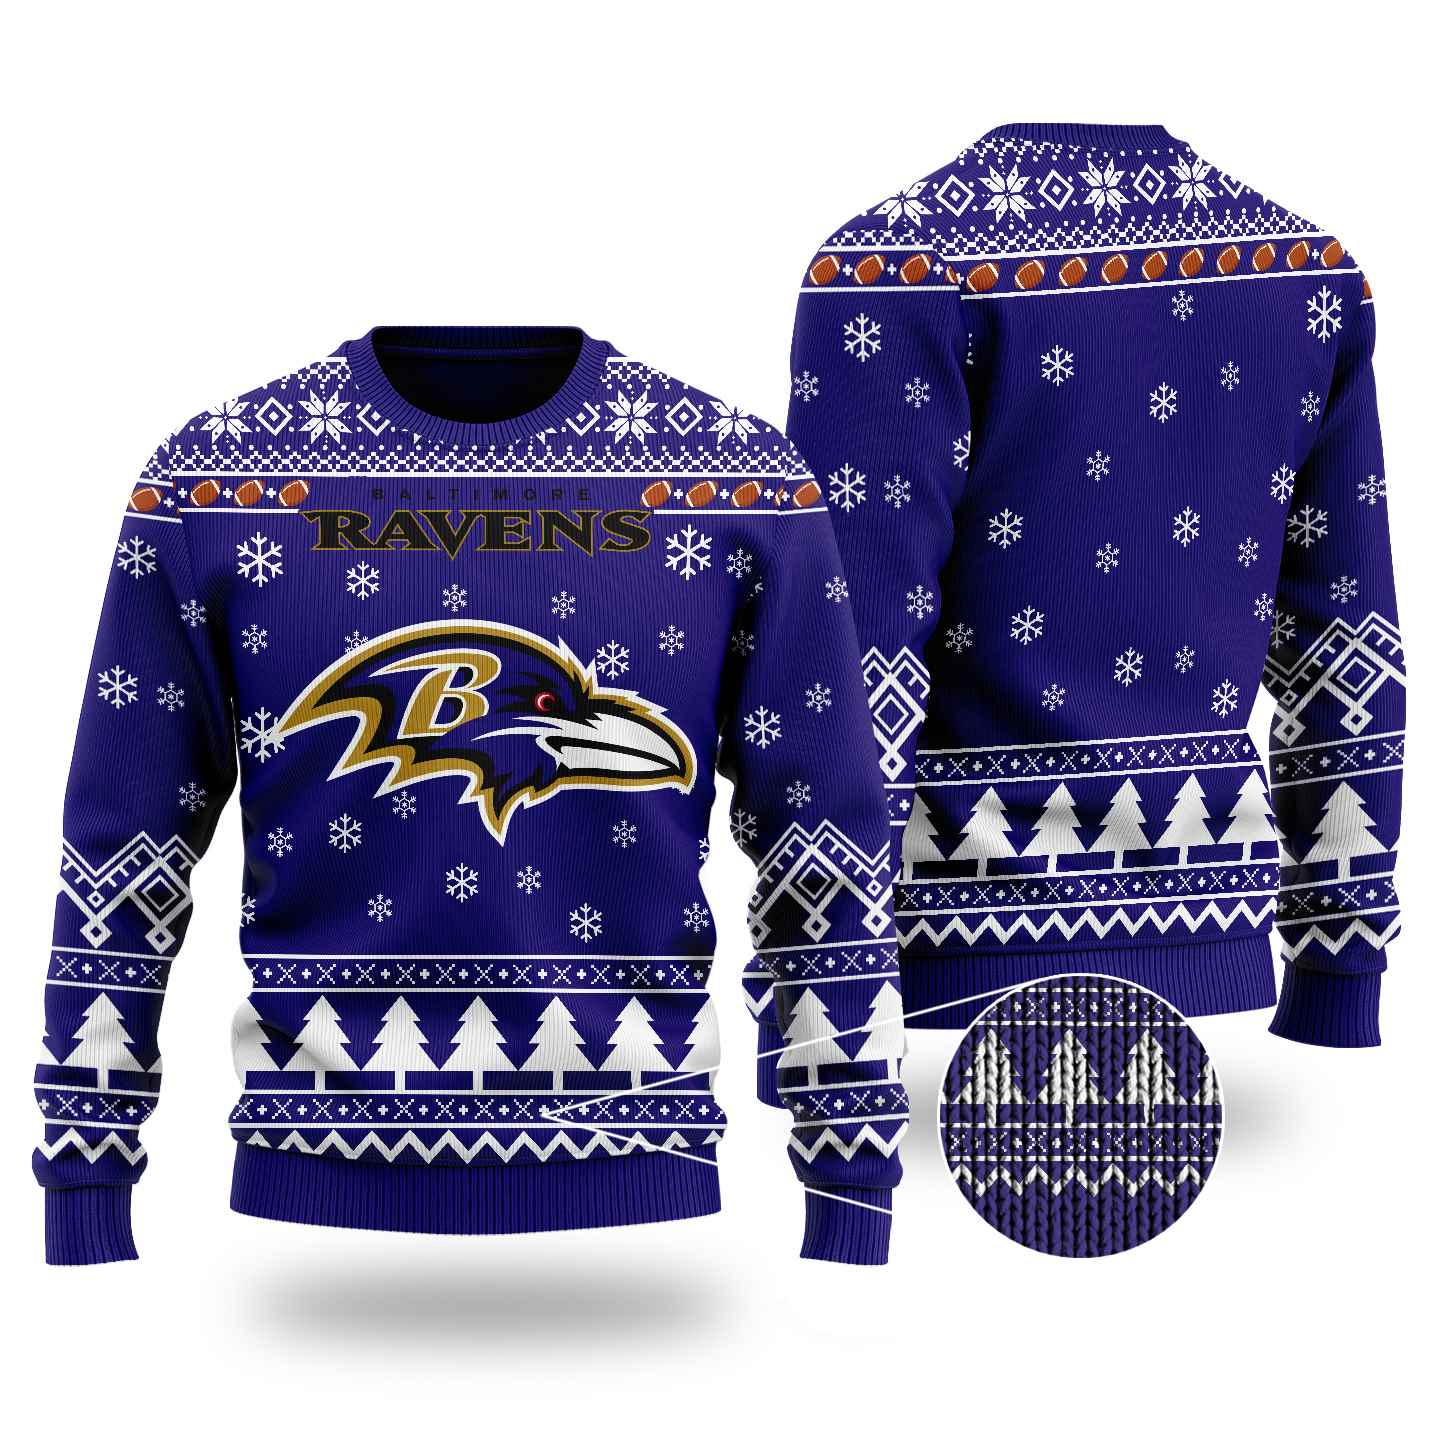 Nfl Baltimore Ravens Chibi Ugly Christmas Sweater Wool Material